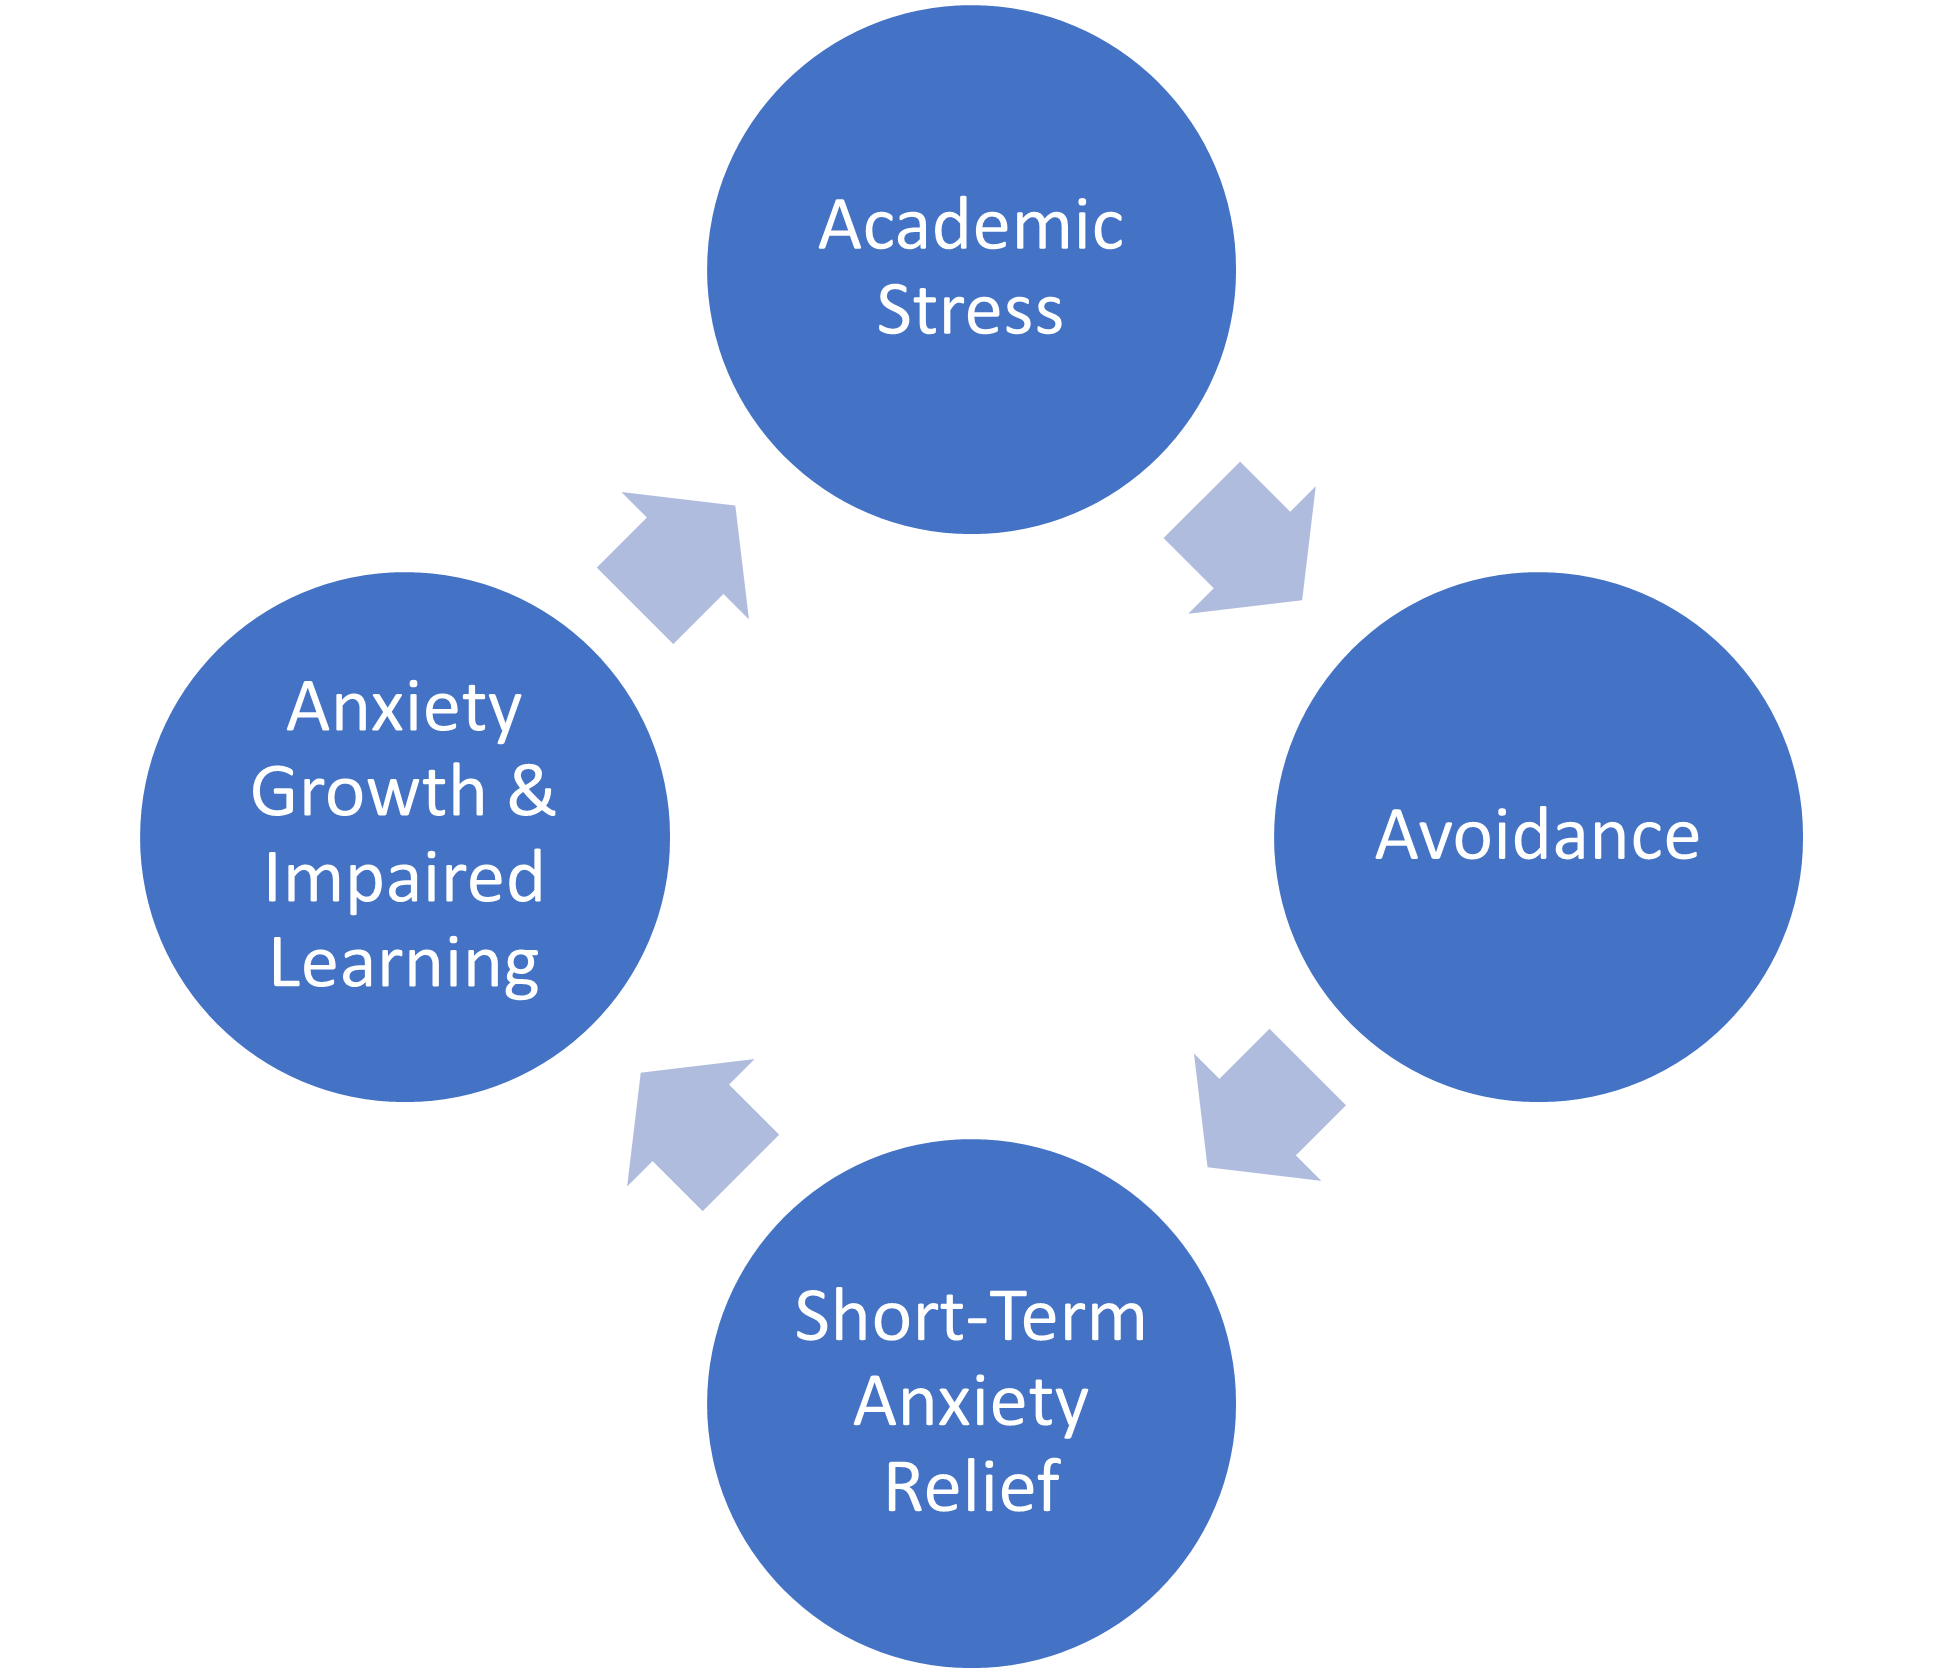 academic stress leads to avoiding school work, followed by short-term anxiety relief, leading to anxiety growth and impaired learning, leading to further academic stress  